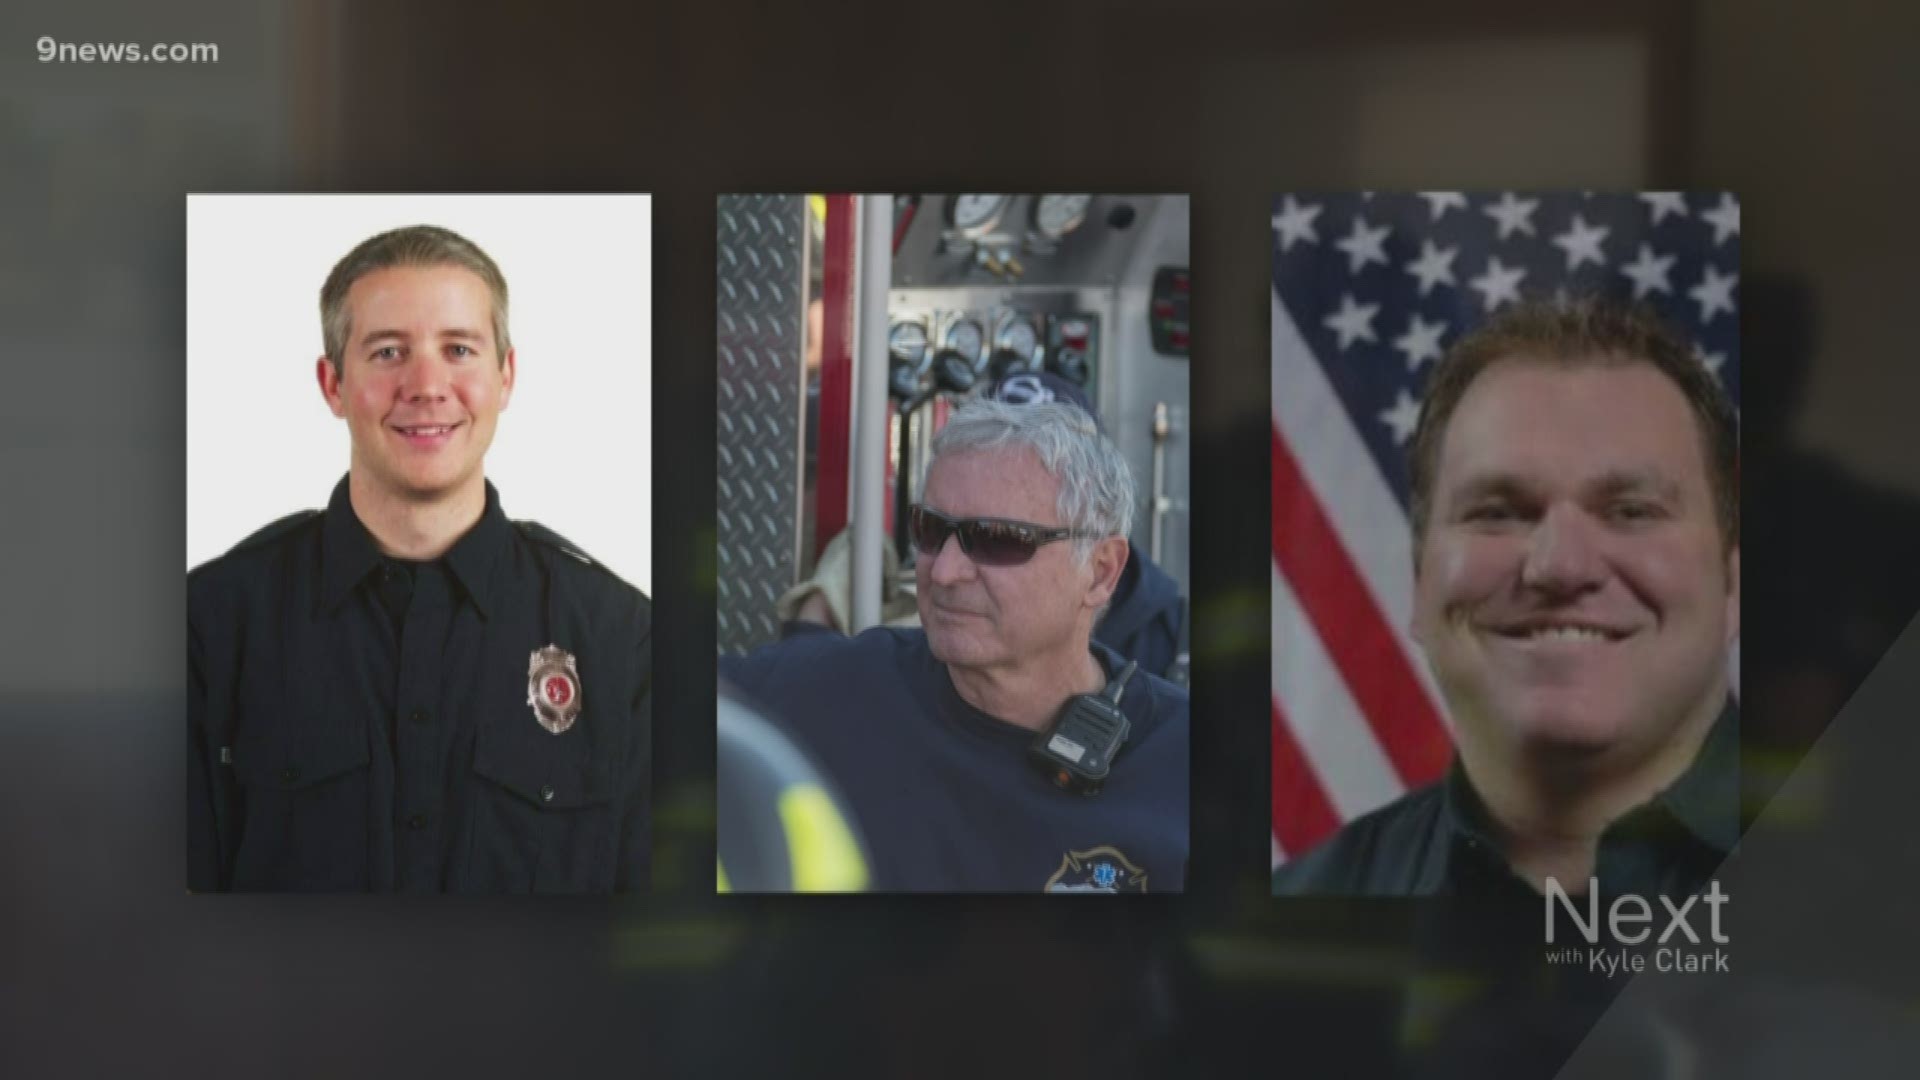 Firefighters have been dying of cancer, but research doesn't exactly tell us how. While we don't know everything, departments in Colorado are trying to make changes.